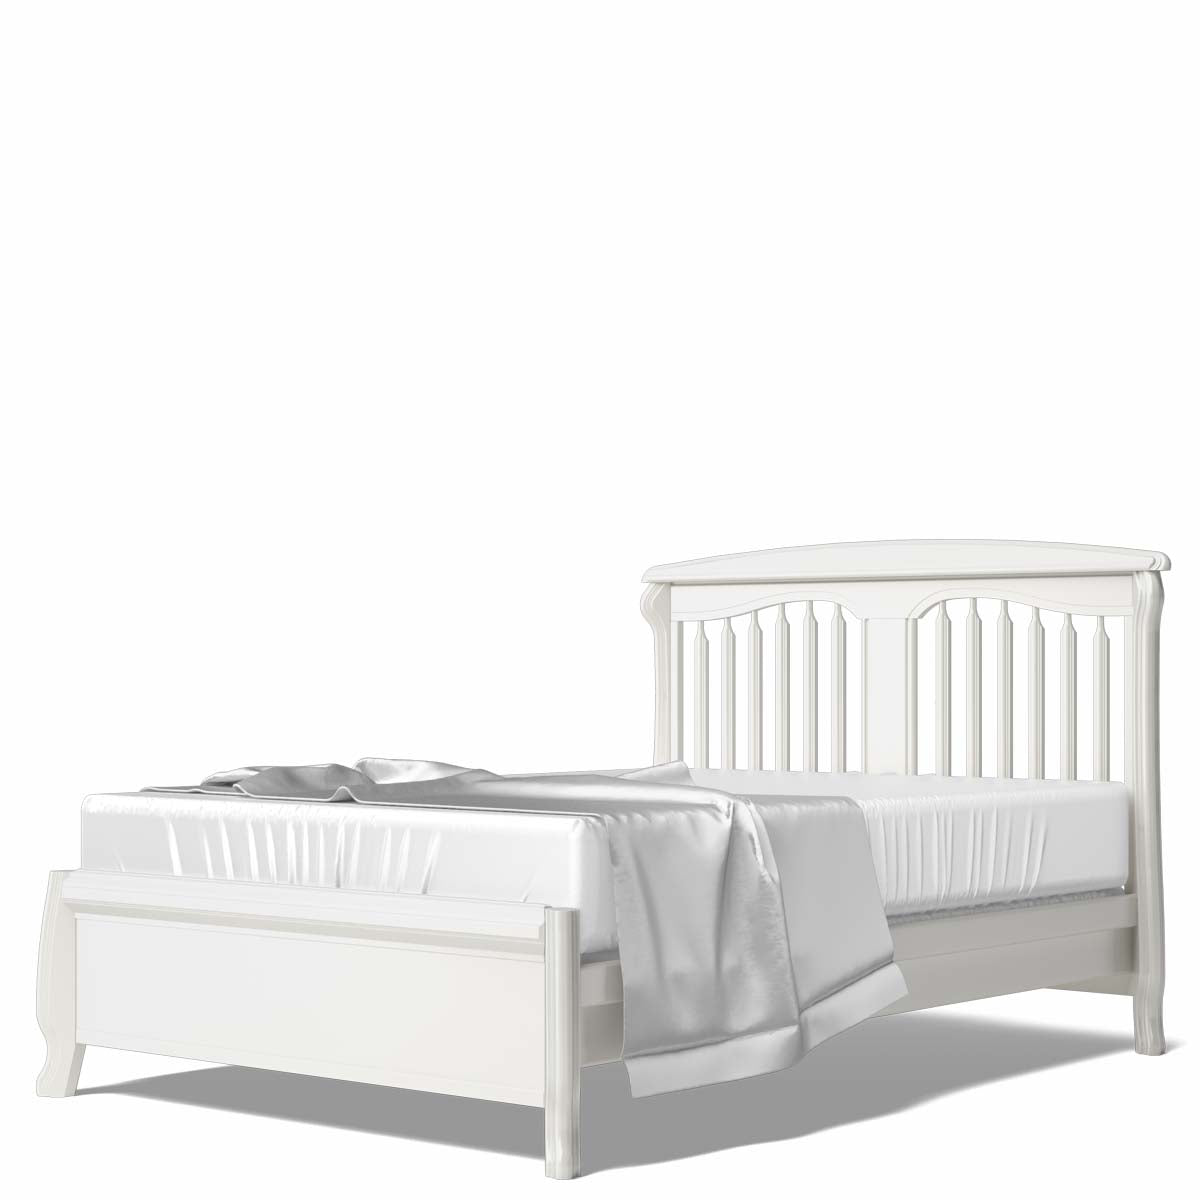 Romina Nerva Full Bed With Low Profile Footboard